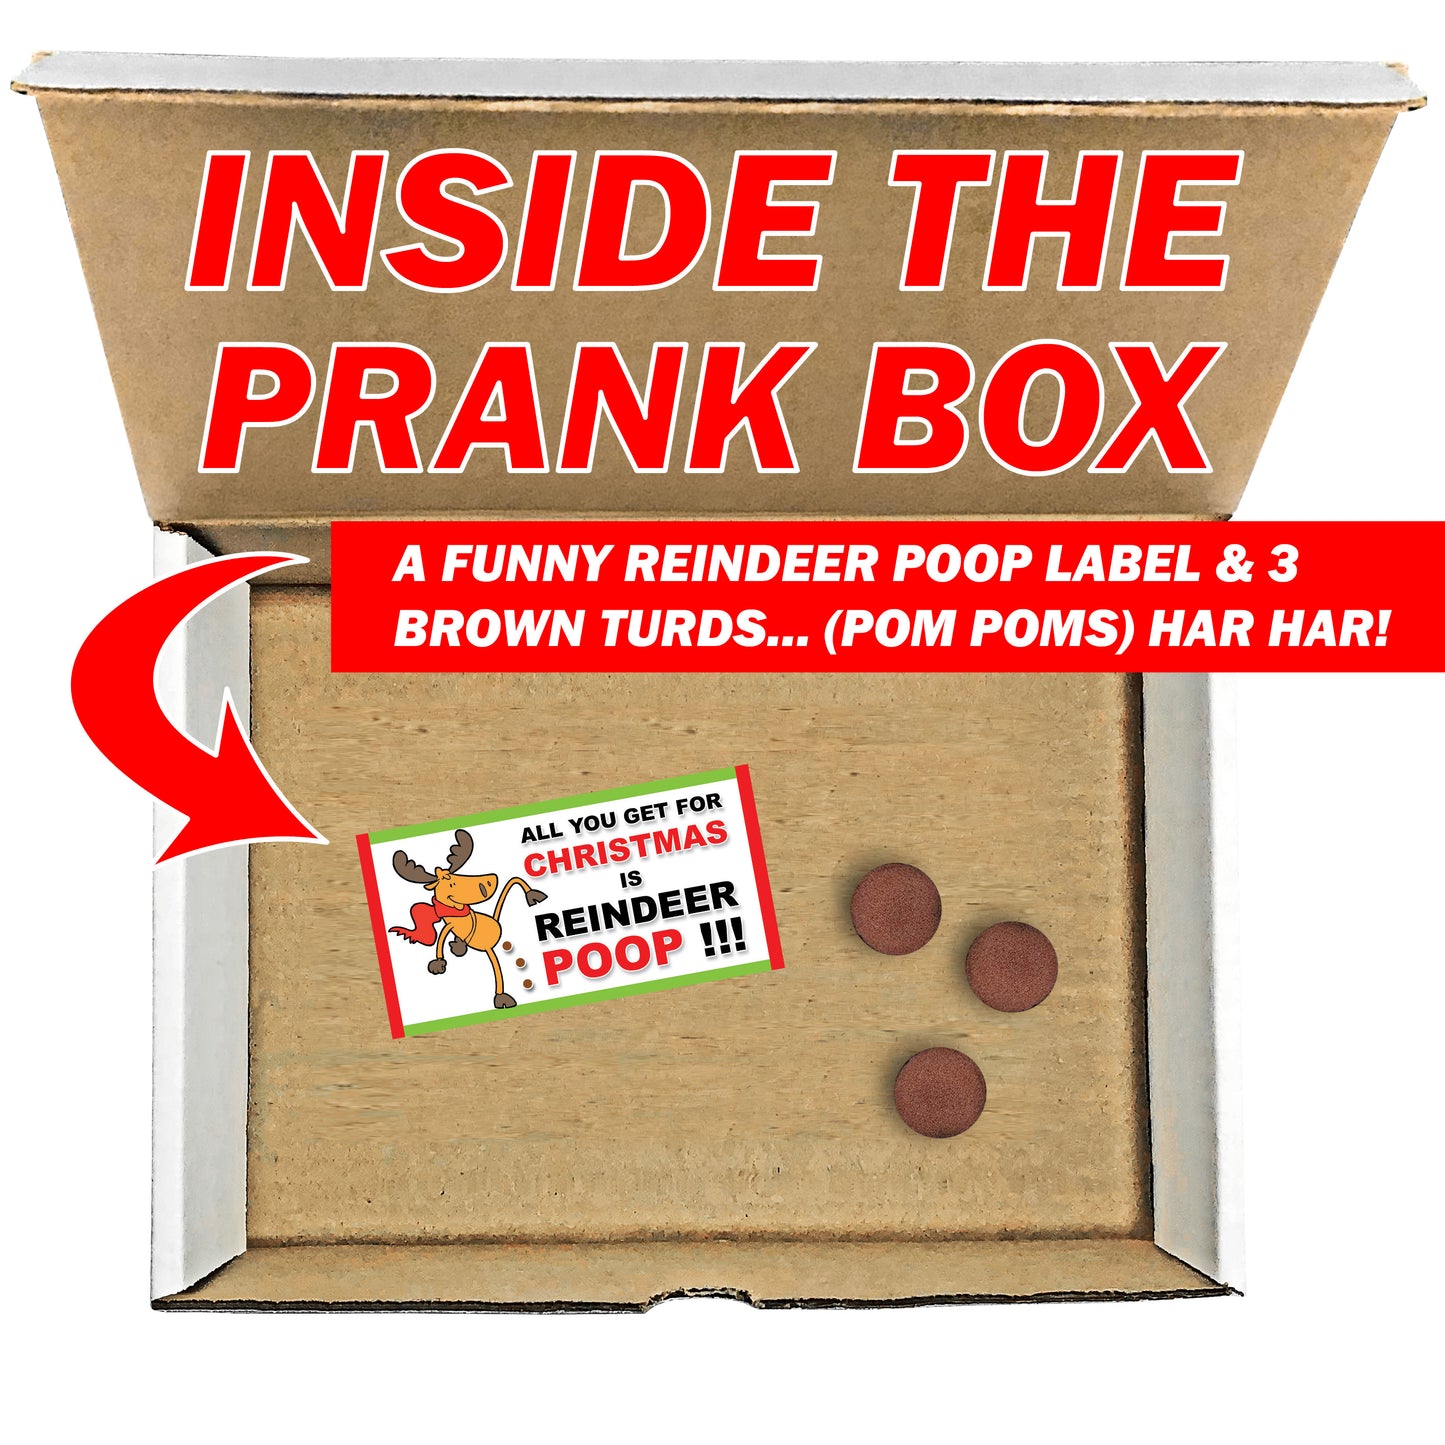 Reindeer Poop Christmas prank box gets mailed directly to your victims 100% anonymously!